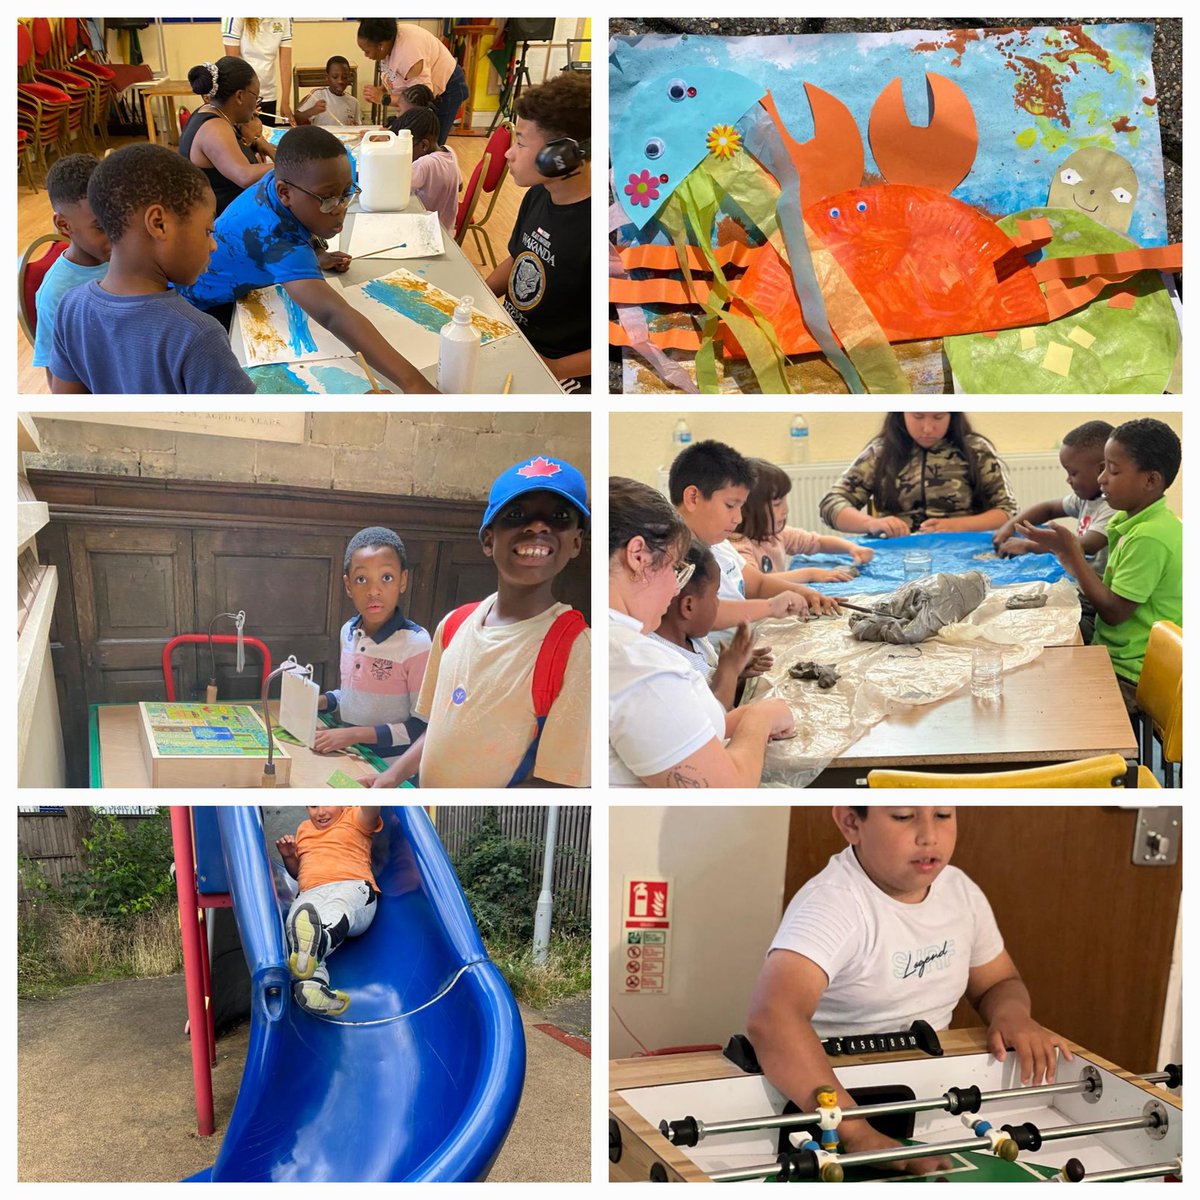 #HAF2023 
#Week1 was lively and interactive, and we explored our beautiful oceans. Children created different artworks about things we could find in the ocean. Yes, they love the oceans. Who doesn't? #Artsforwellbeing #Happiness #musicanddance #messyplay